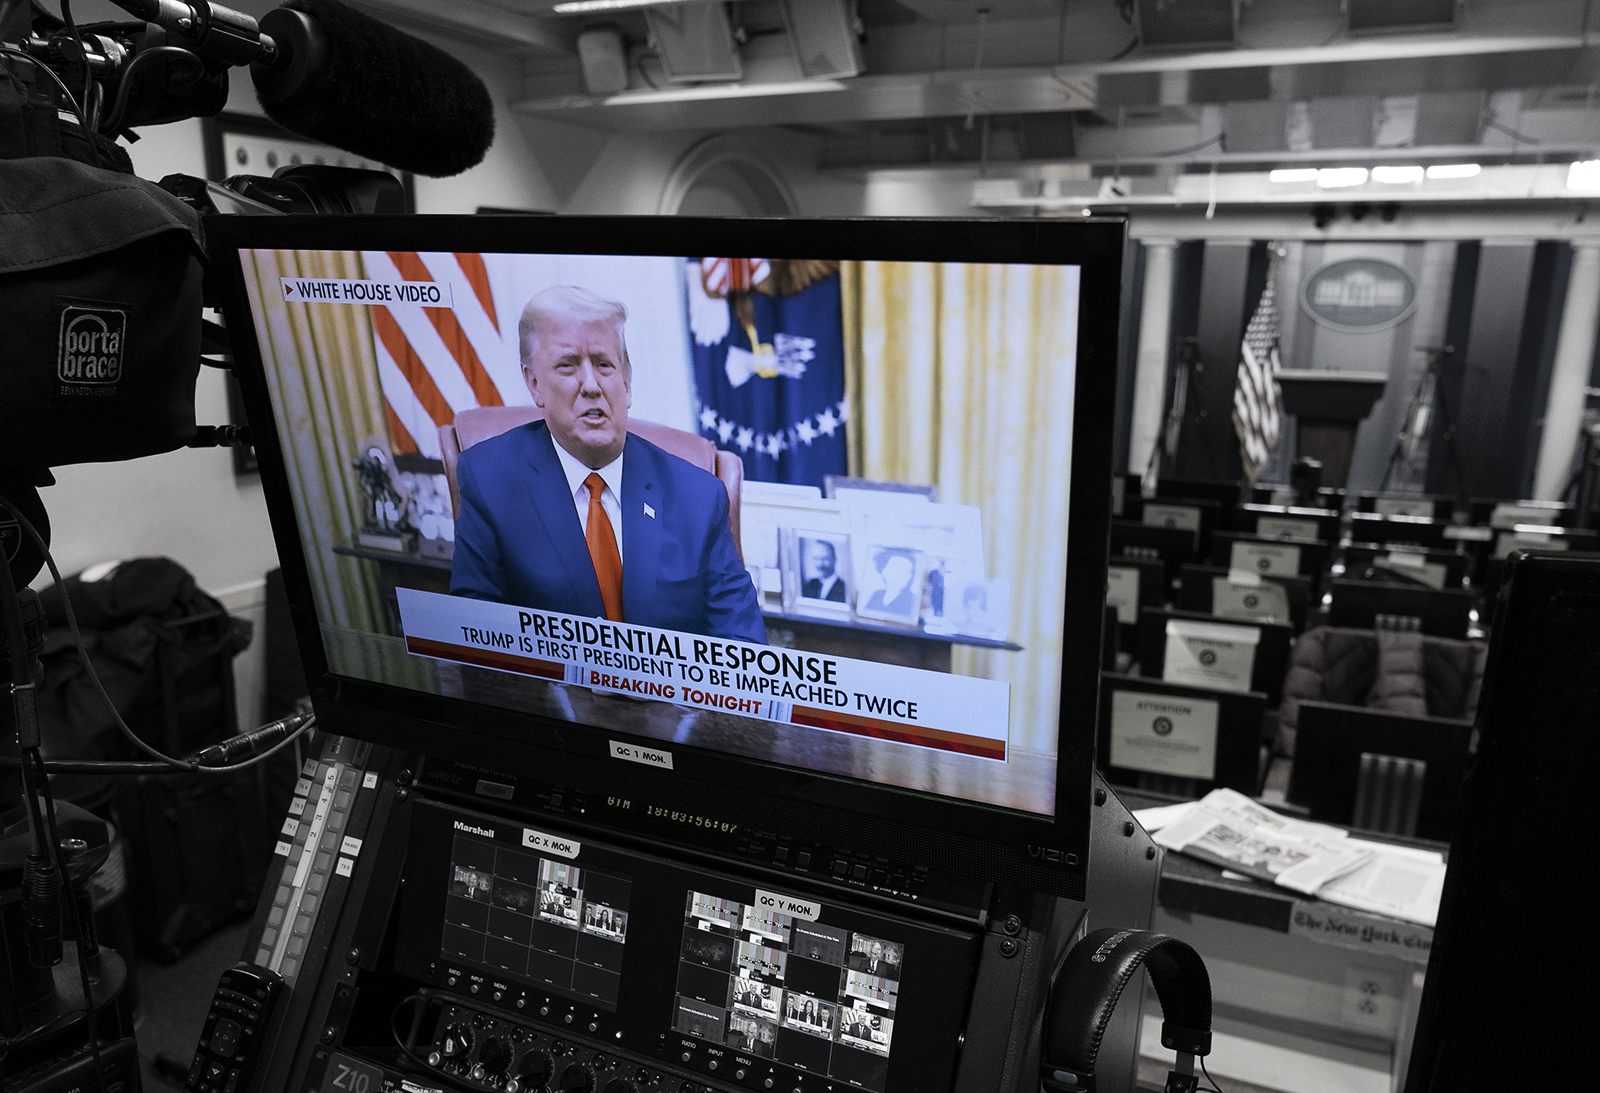 epa08936264 US President Donald J. Trump reads a a pre-recorded statement on recent and possible future political violence, seen on a monitor in the White House Briefing Room in Washington, DC, USA, 13 January 2021. US President Donald J. Trump was impeached for incitement of insurrection following the attack on the Capitol on 06 January as lawmakers worked to certify Joe Biden as the next President of the United States. This is the second time the US House of Representatives impeach Trump, making him the first President to be impeached twice.  EPA/Chris Kleponis / POOL